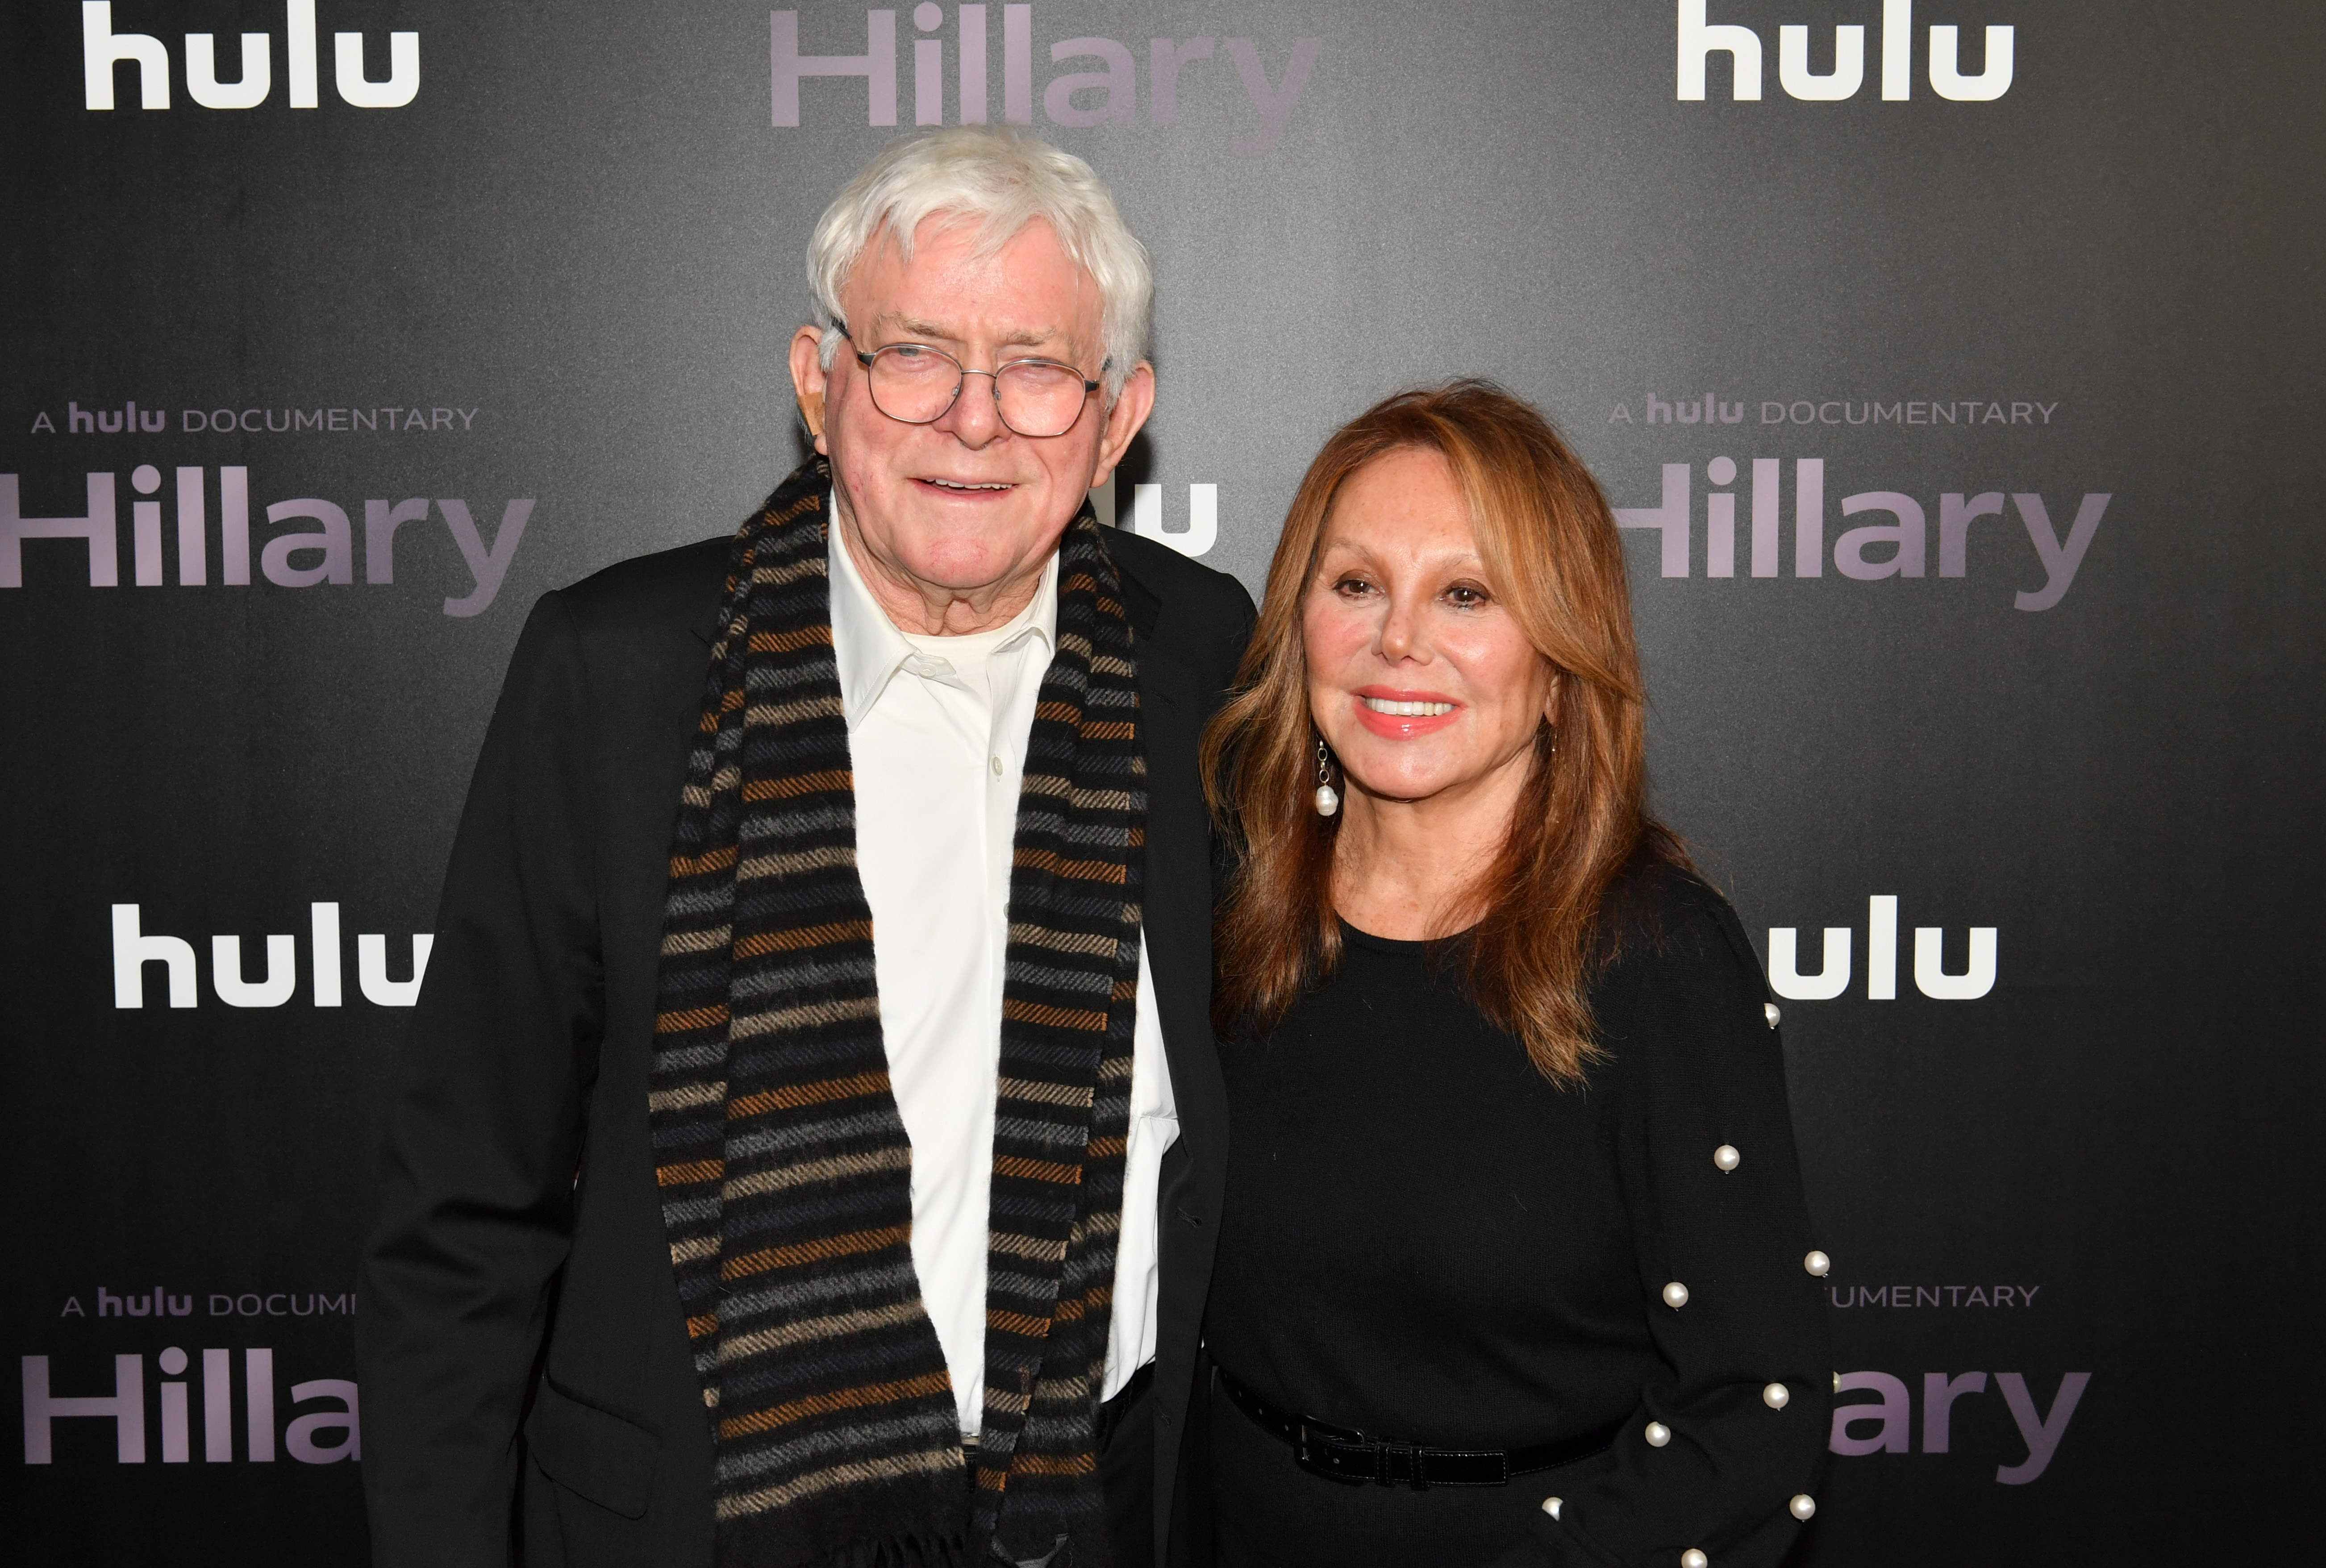 Phil Donahue and Marlo Thomas on March 4, 2020 at 'Hillary' film premiere, Arrivals, New York| Source: Getty Images